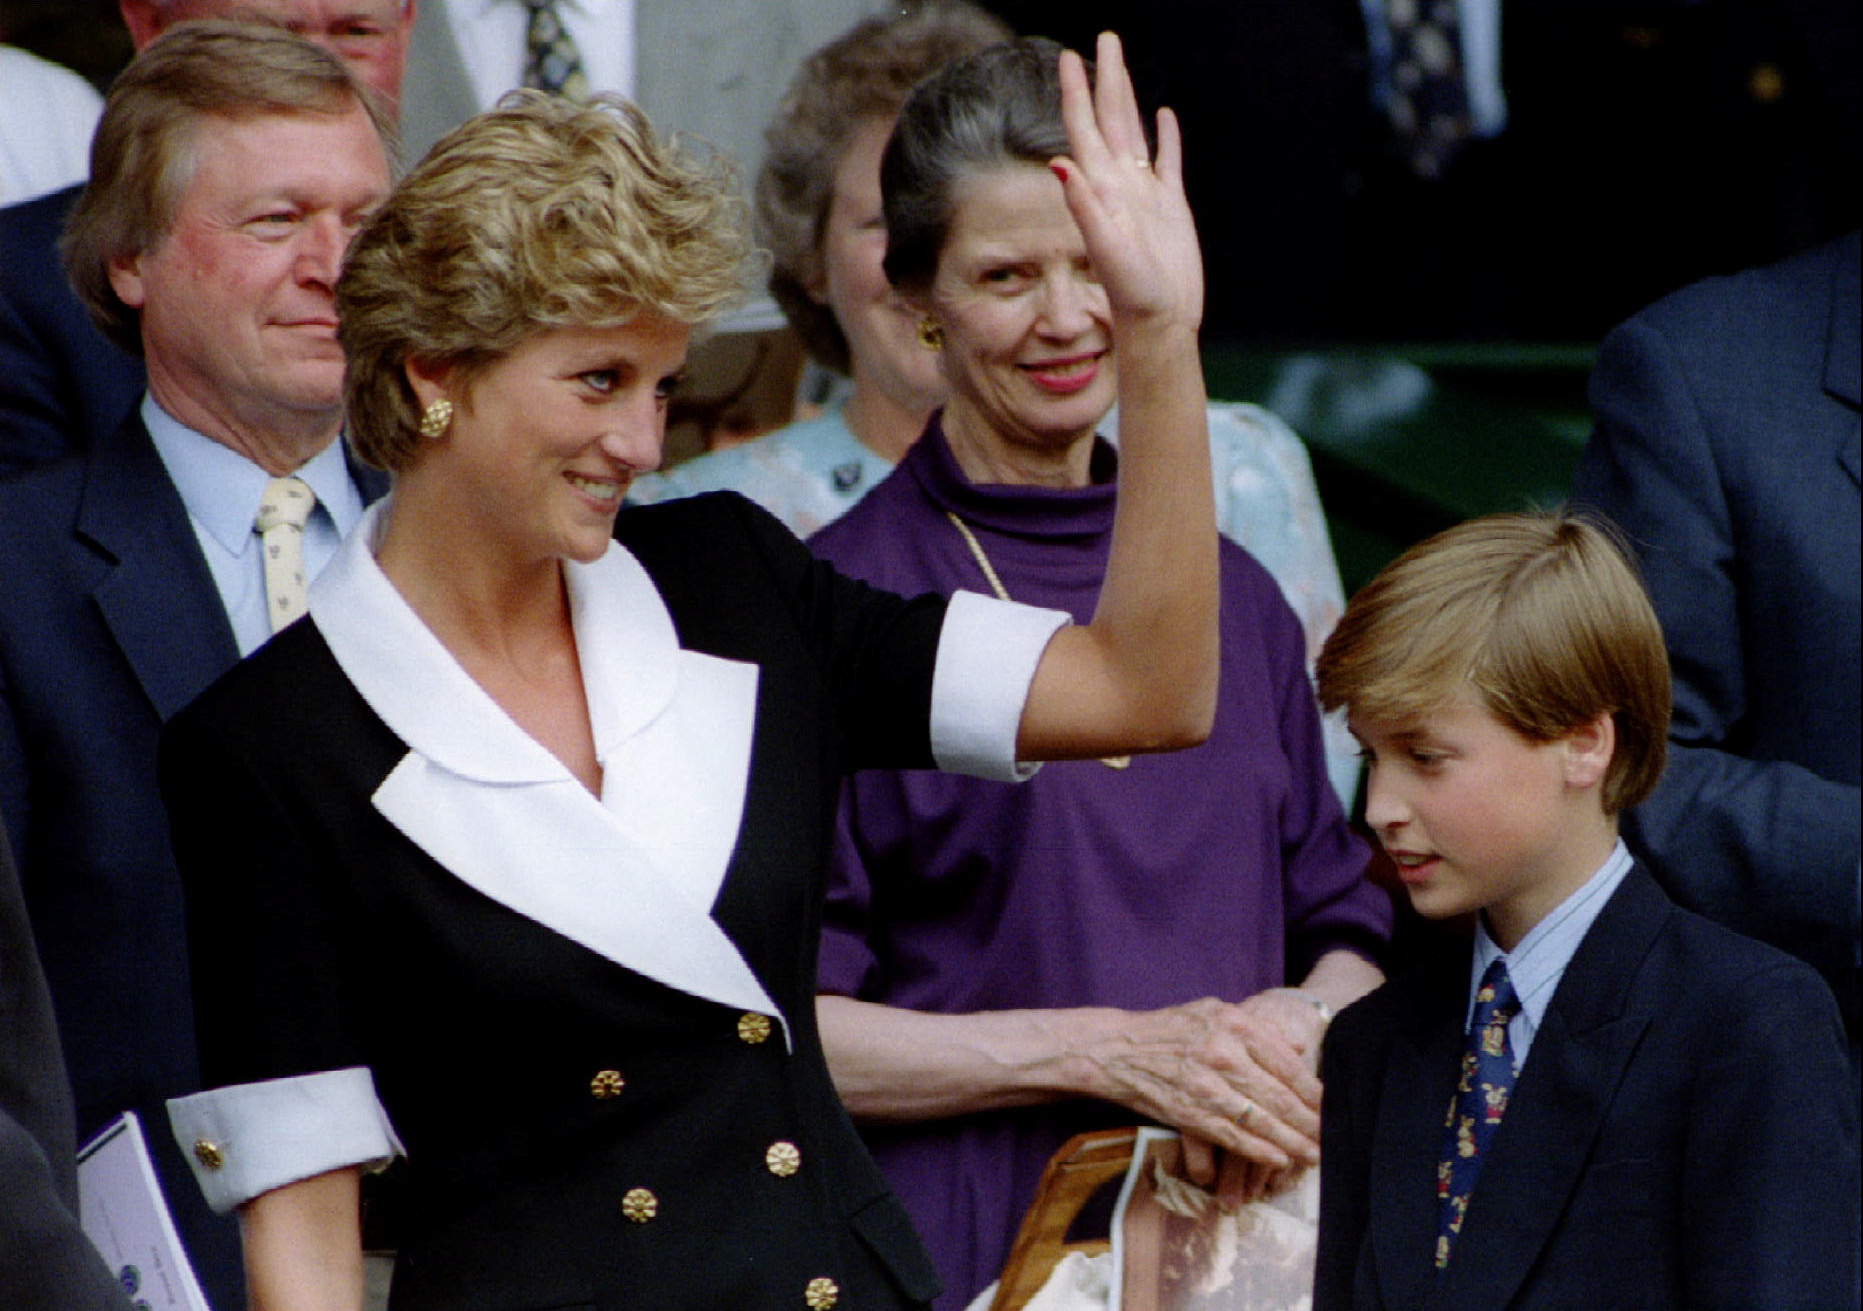 The Princess of Wales, accompanied by her son Prince William, arrives at Wimbledon's Centre Court before the start of the Women's Singles final July 2